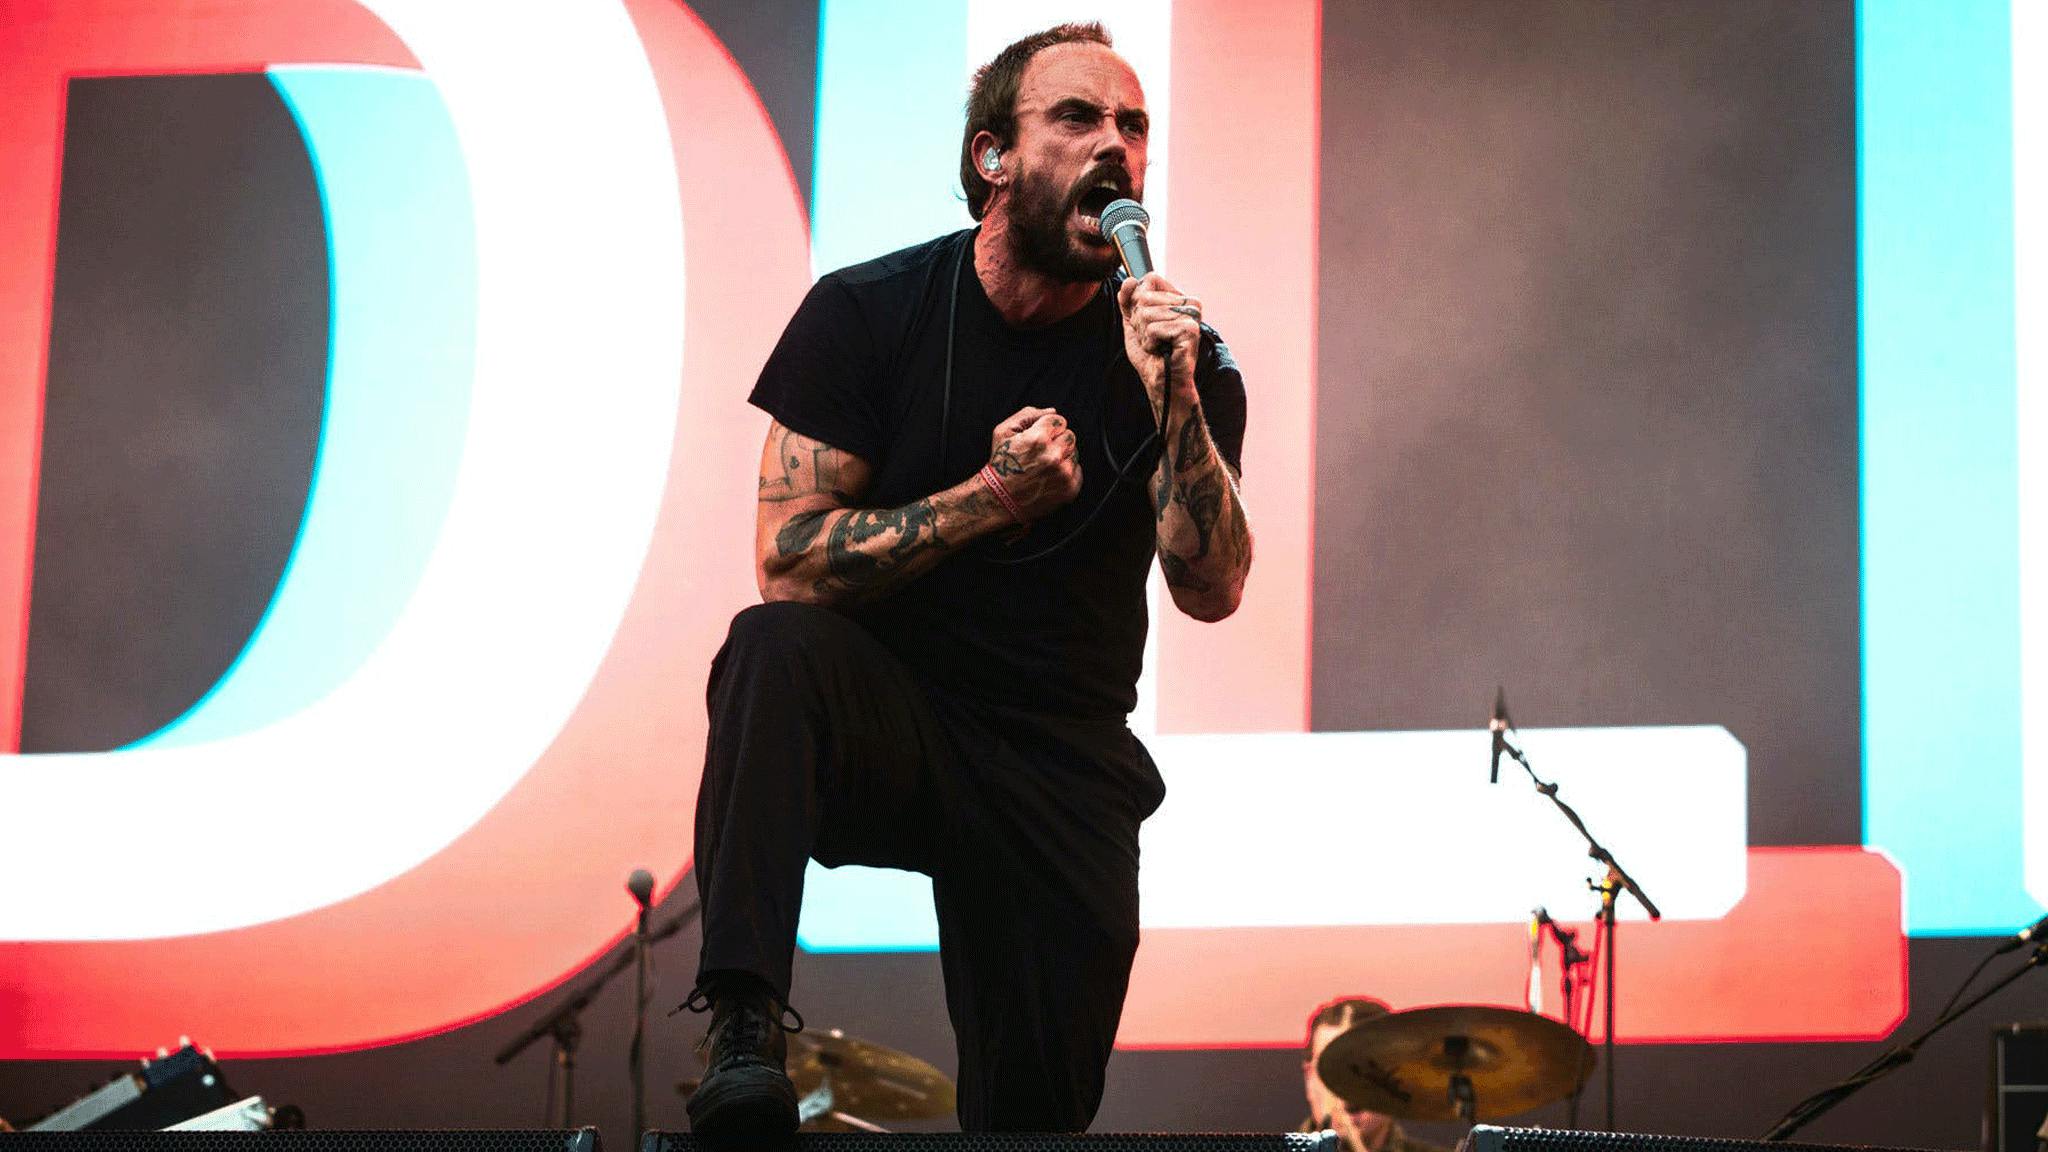 IDLES have confirmed their only UK show this summer